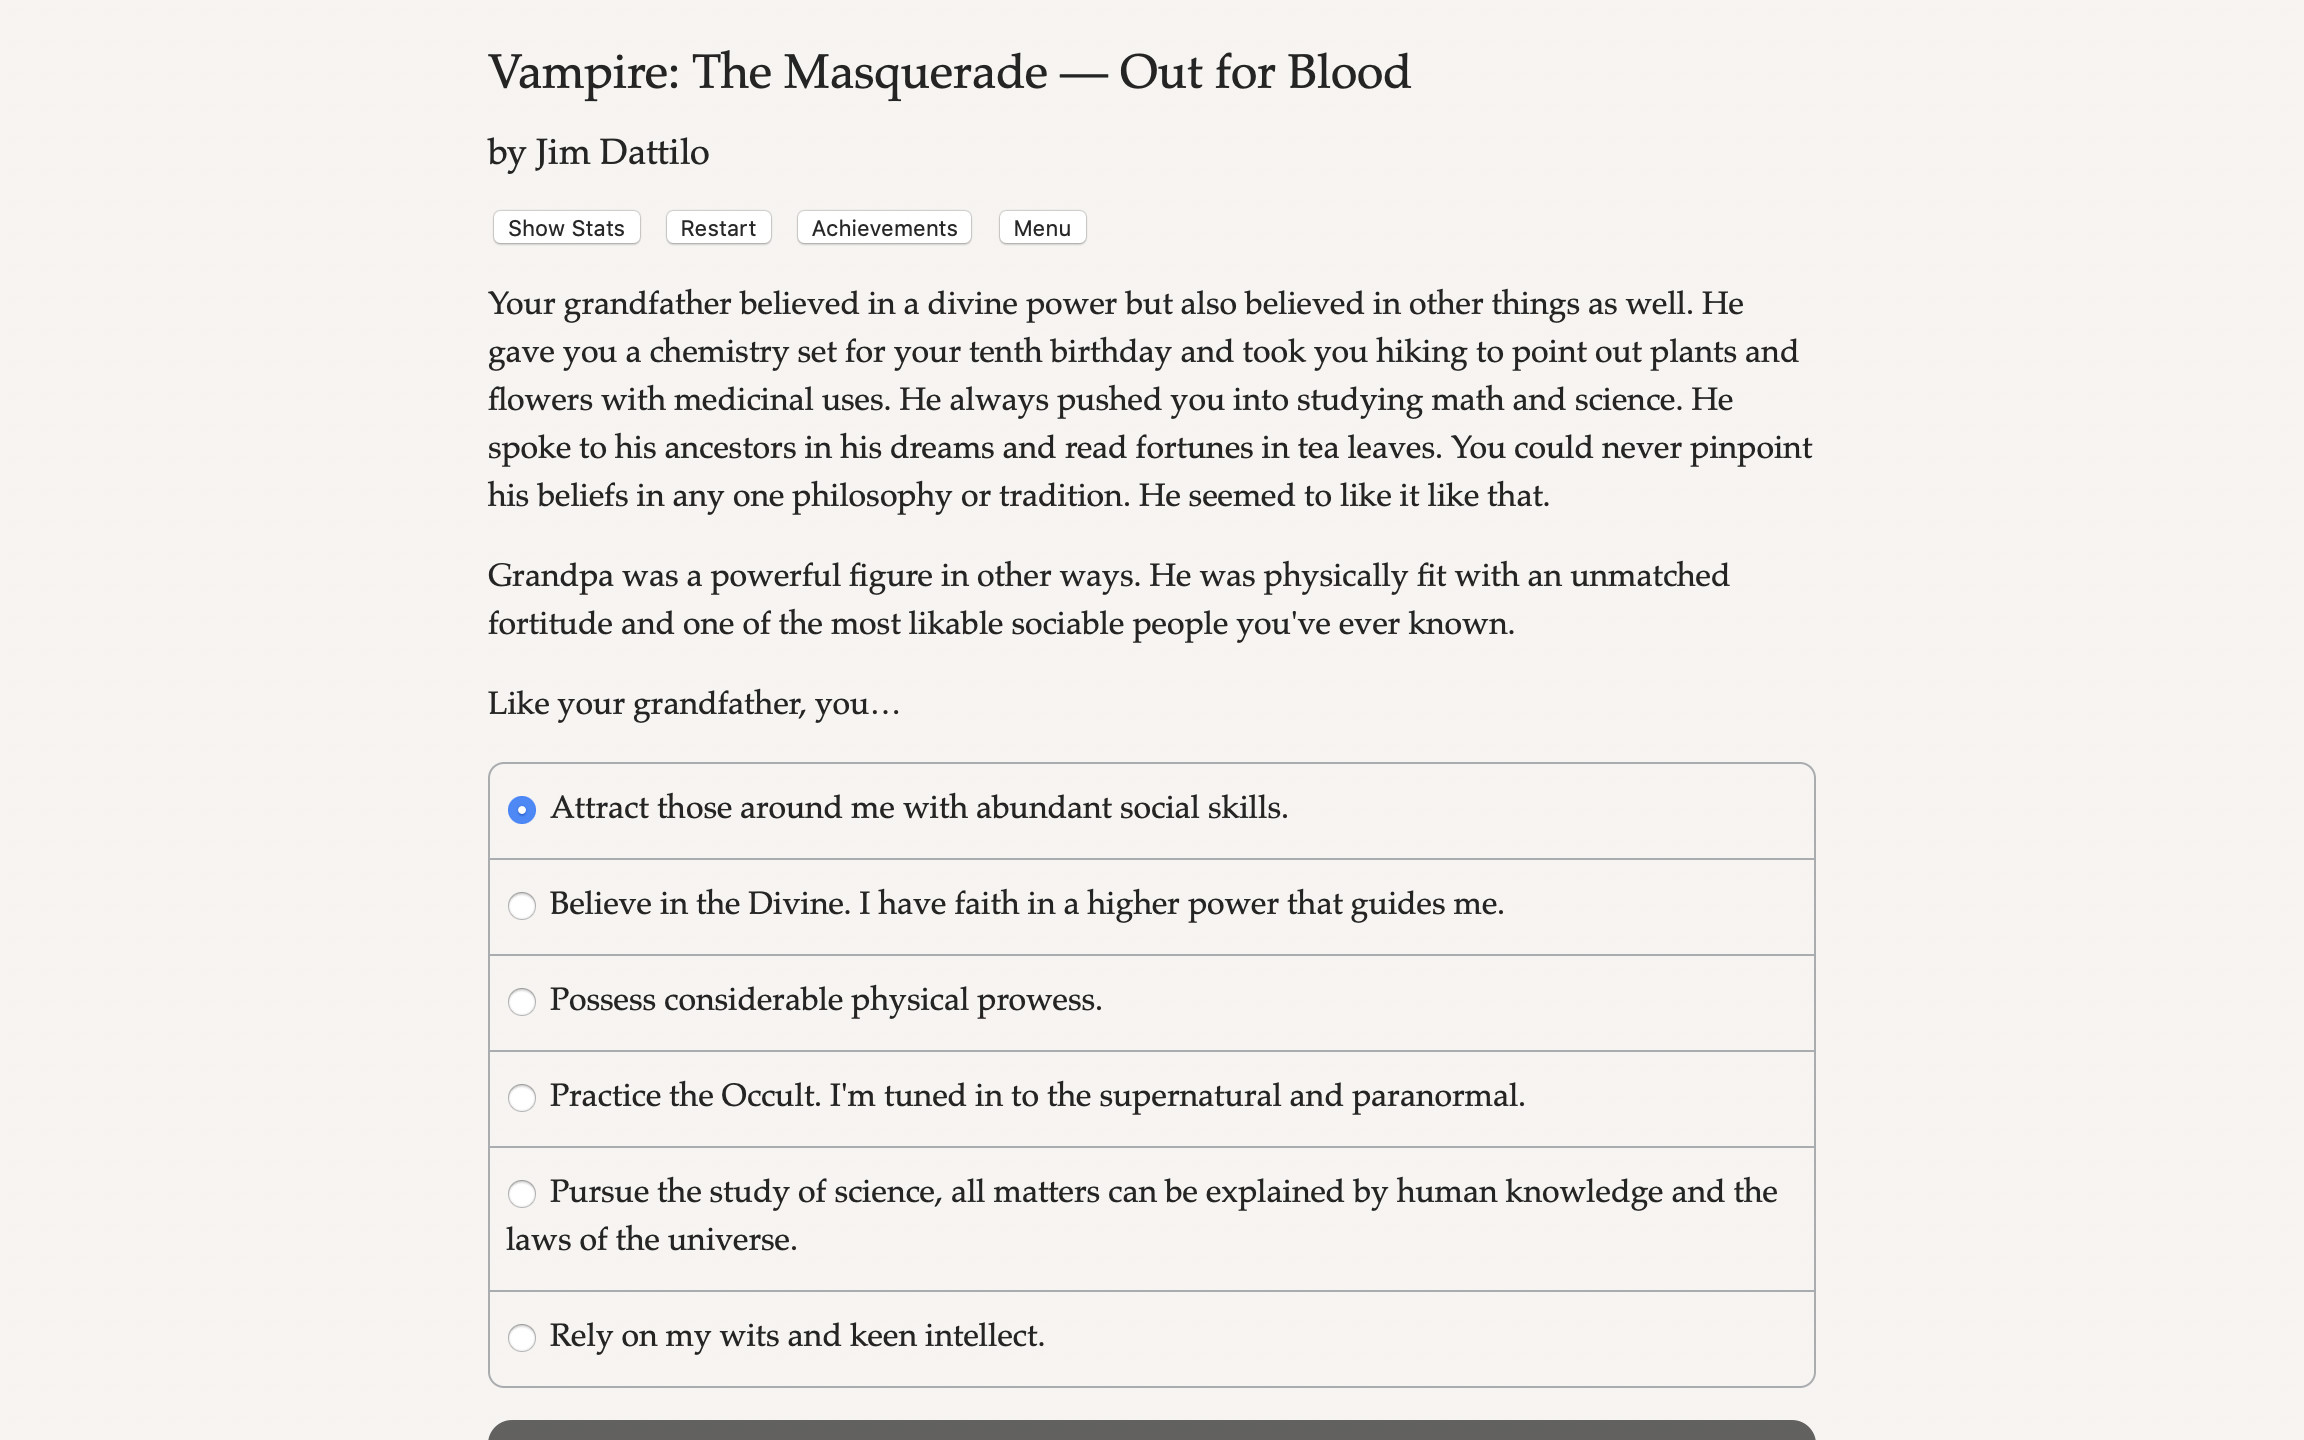 Vampire: The Masquerade — Out for Blood screenshot